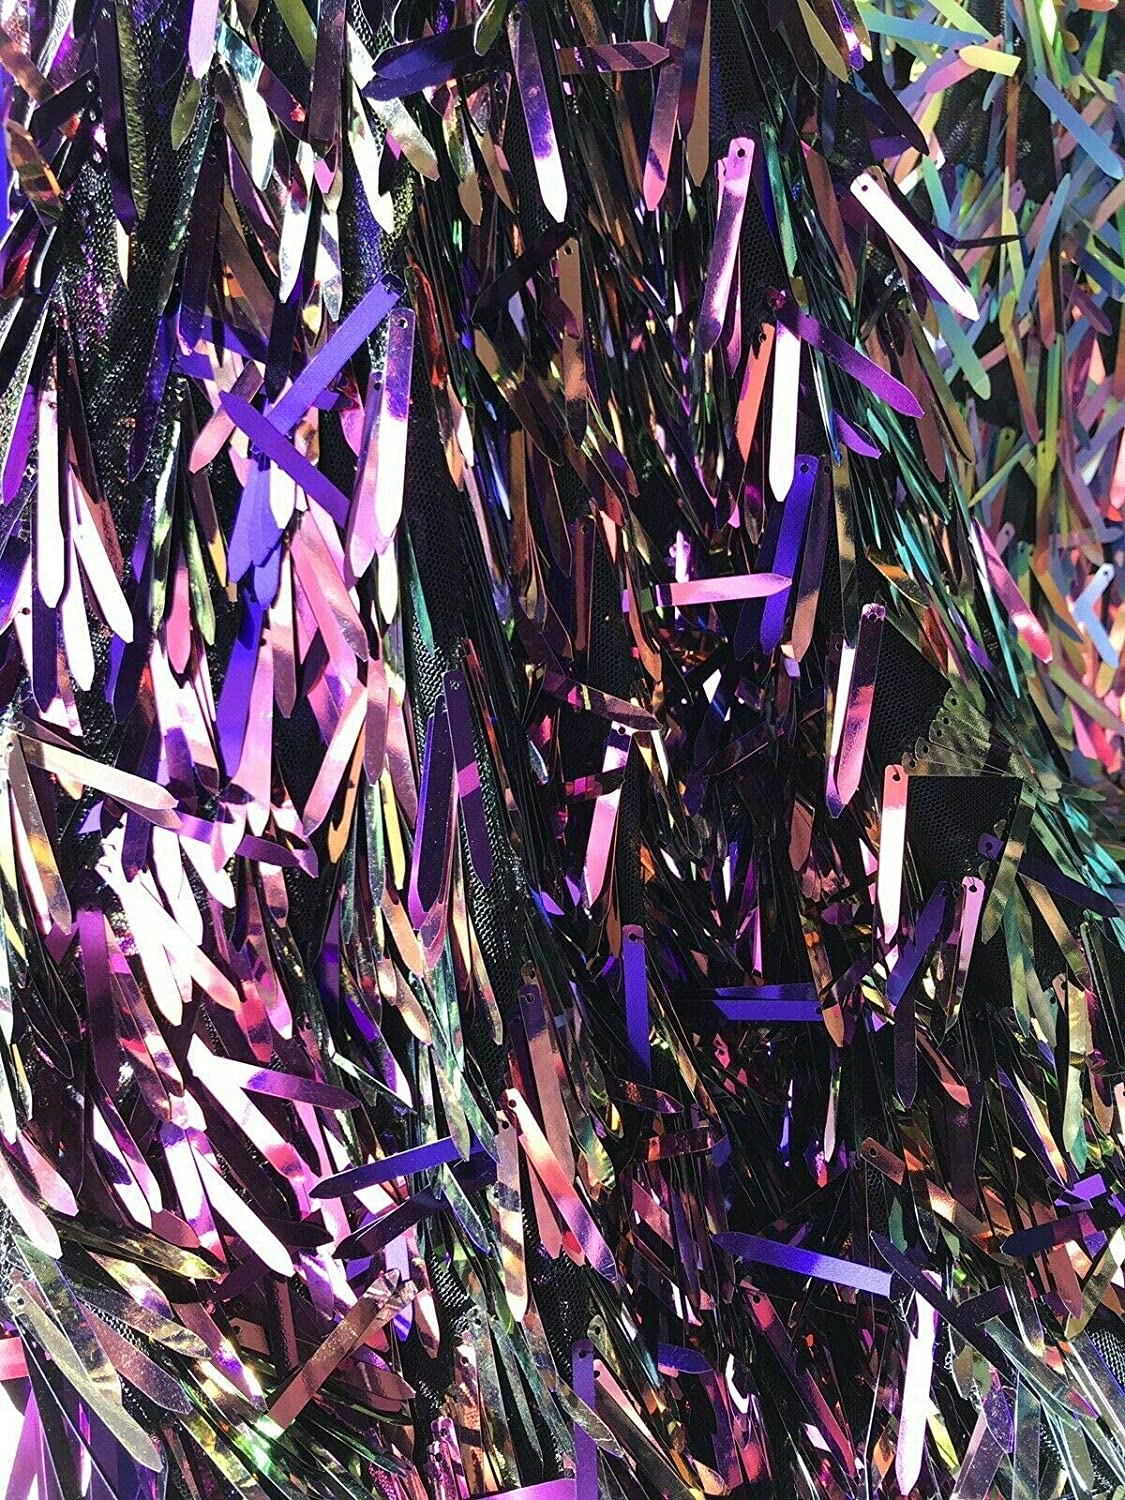 Swords Design Iridescent Sequins Burning Man Costume Craft Fabric by The Yard. (50-52 INCHES Iridescent Sequins by The Yard Black/Purple Iridescent/Black MESH